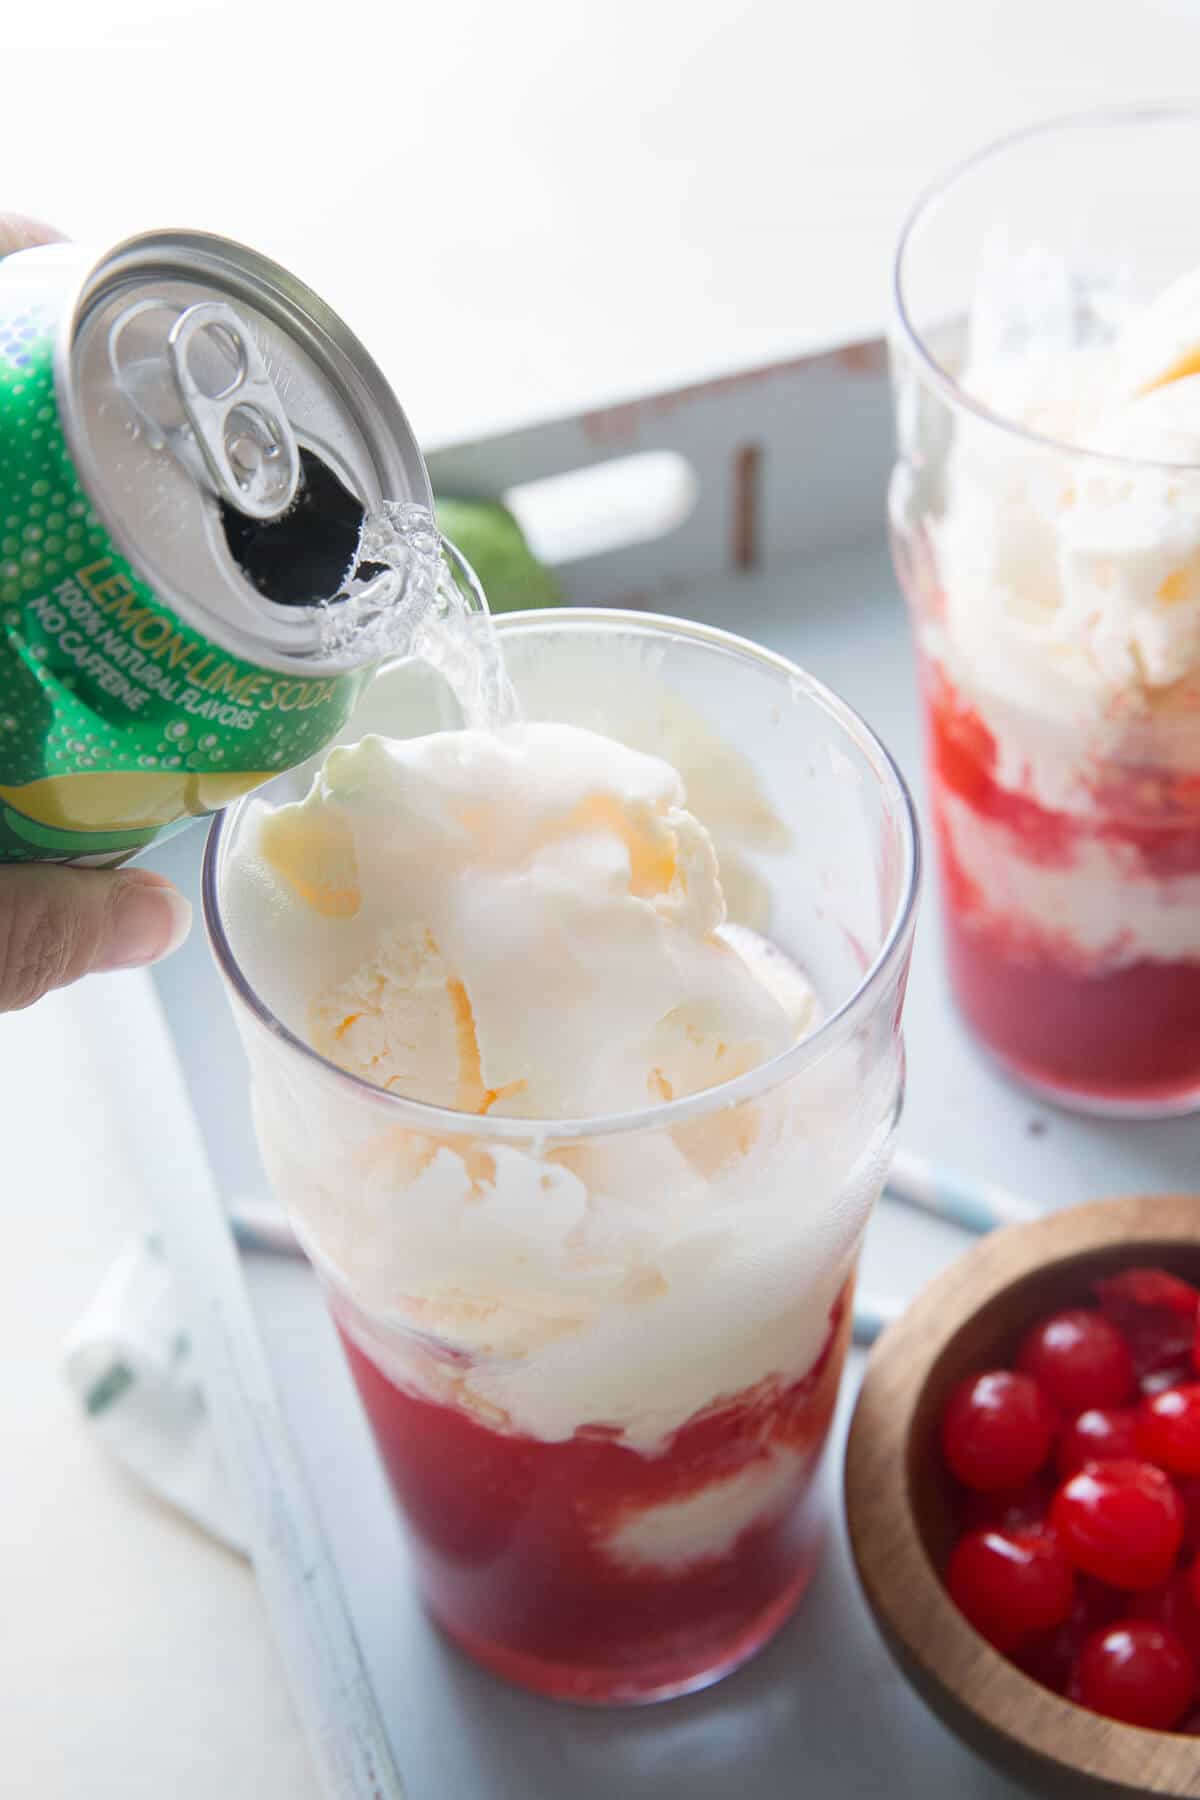 Cherry Limeade float will make you feel like a kid again! It's so sweet and and tangy!